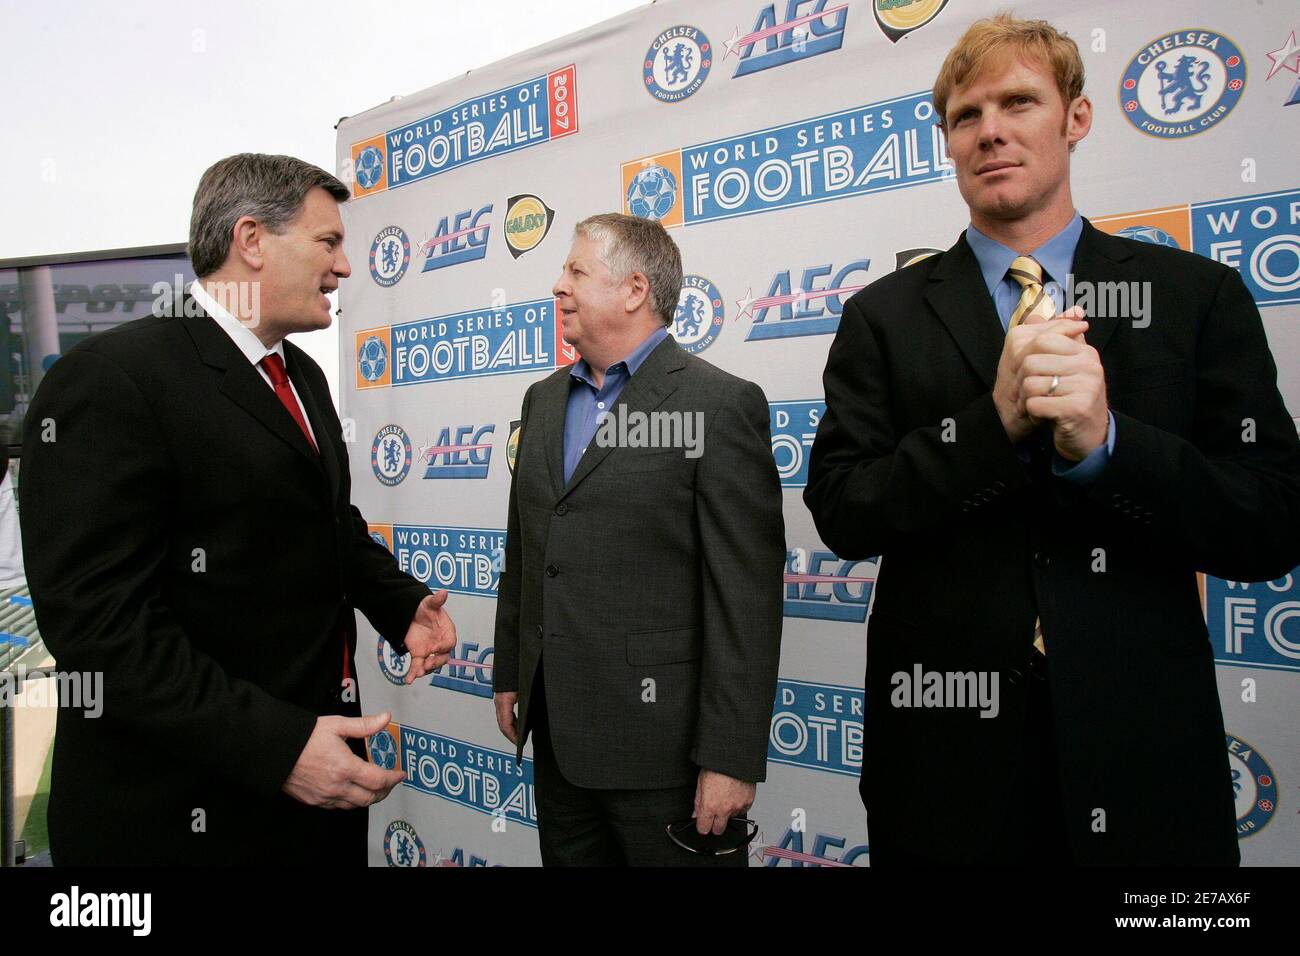 Paul Smith (C), director of business affairs for the Chelsea Football Club,  talks with AEG President Tim Leiweke (L) as Los Angeles Galaxy president  Alexi Kakas looks on following a news conference